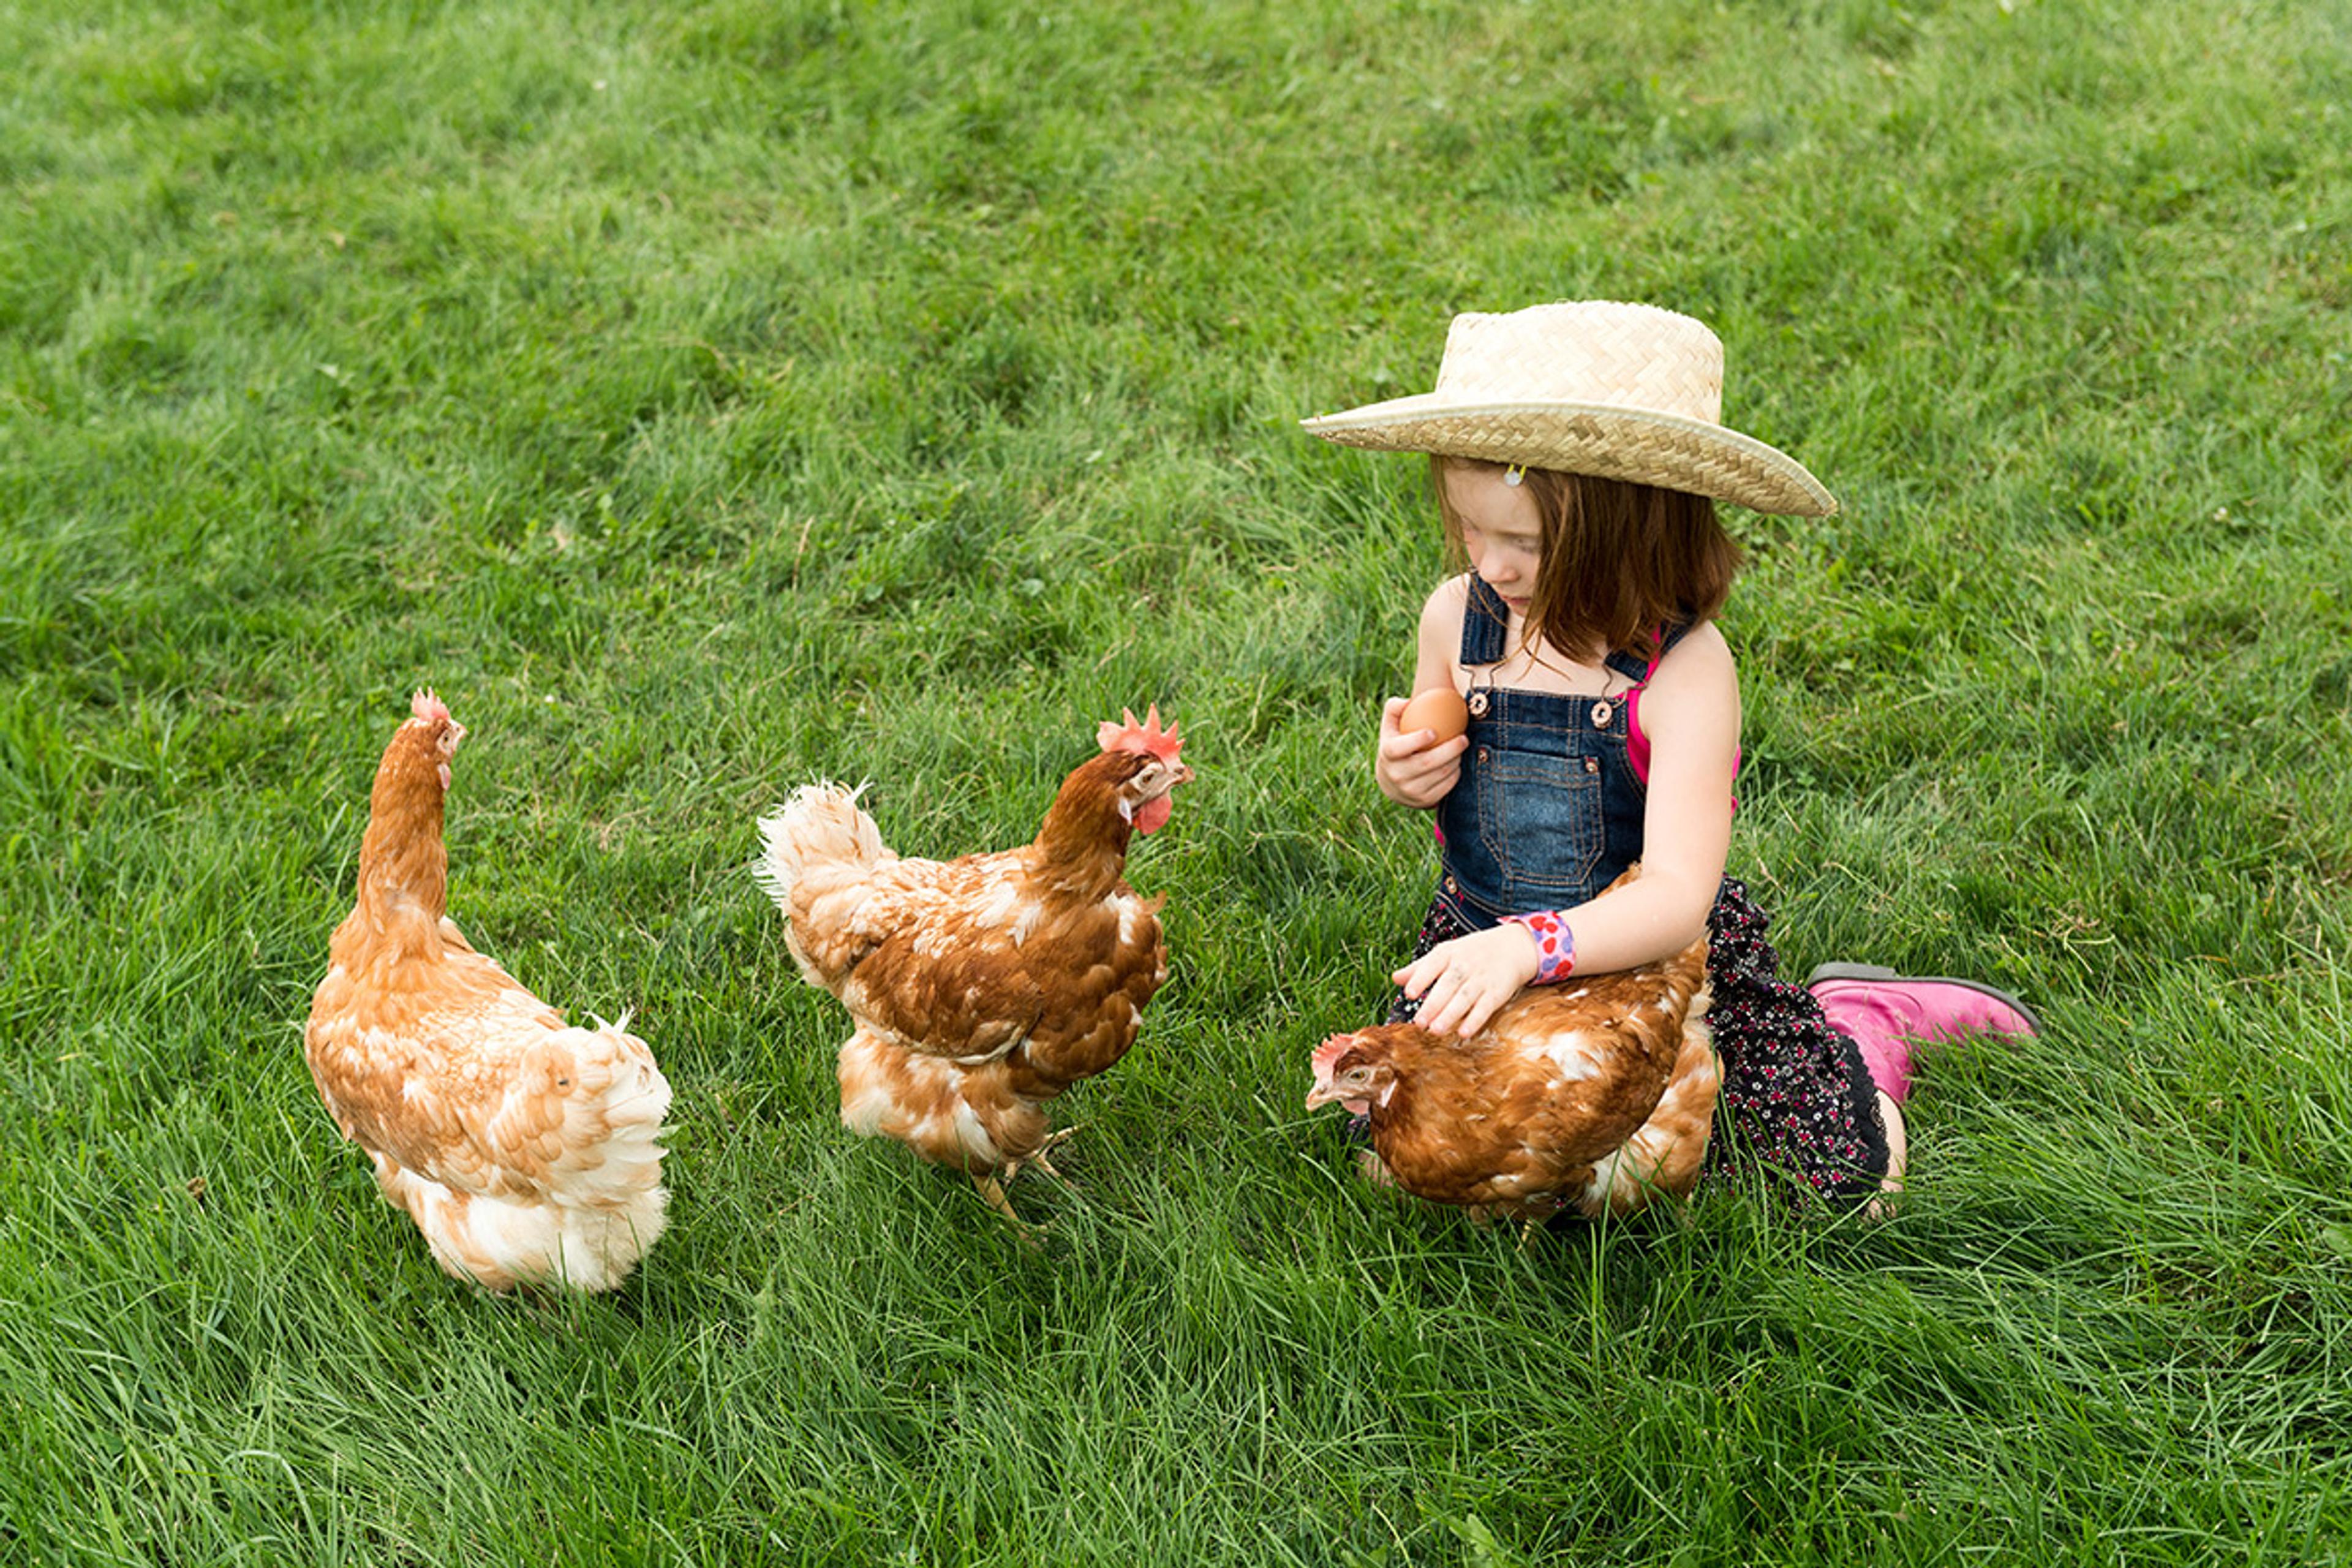 Little girl in overalls gathers brown eggs from hens in a green field.